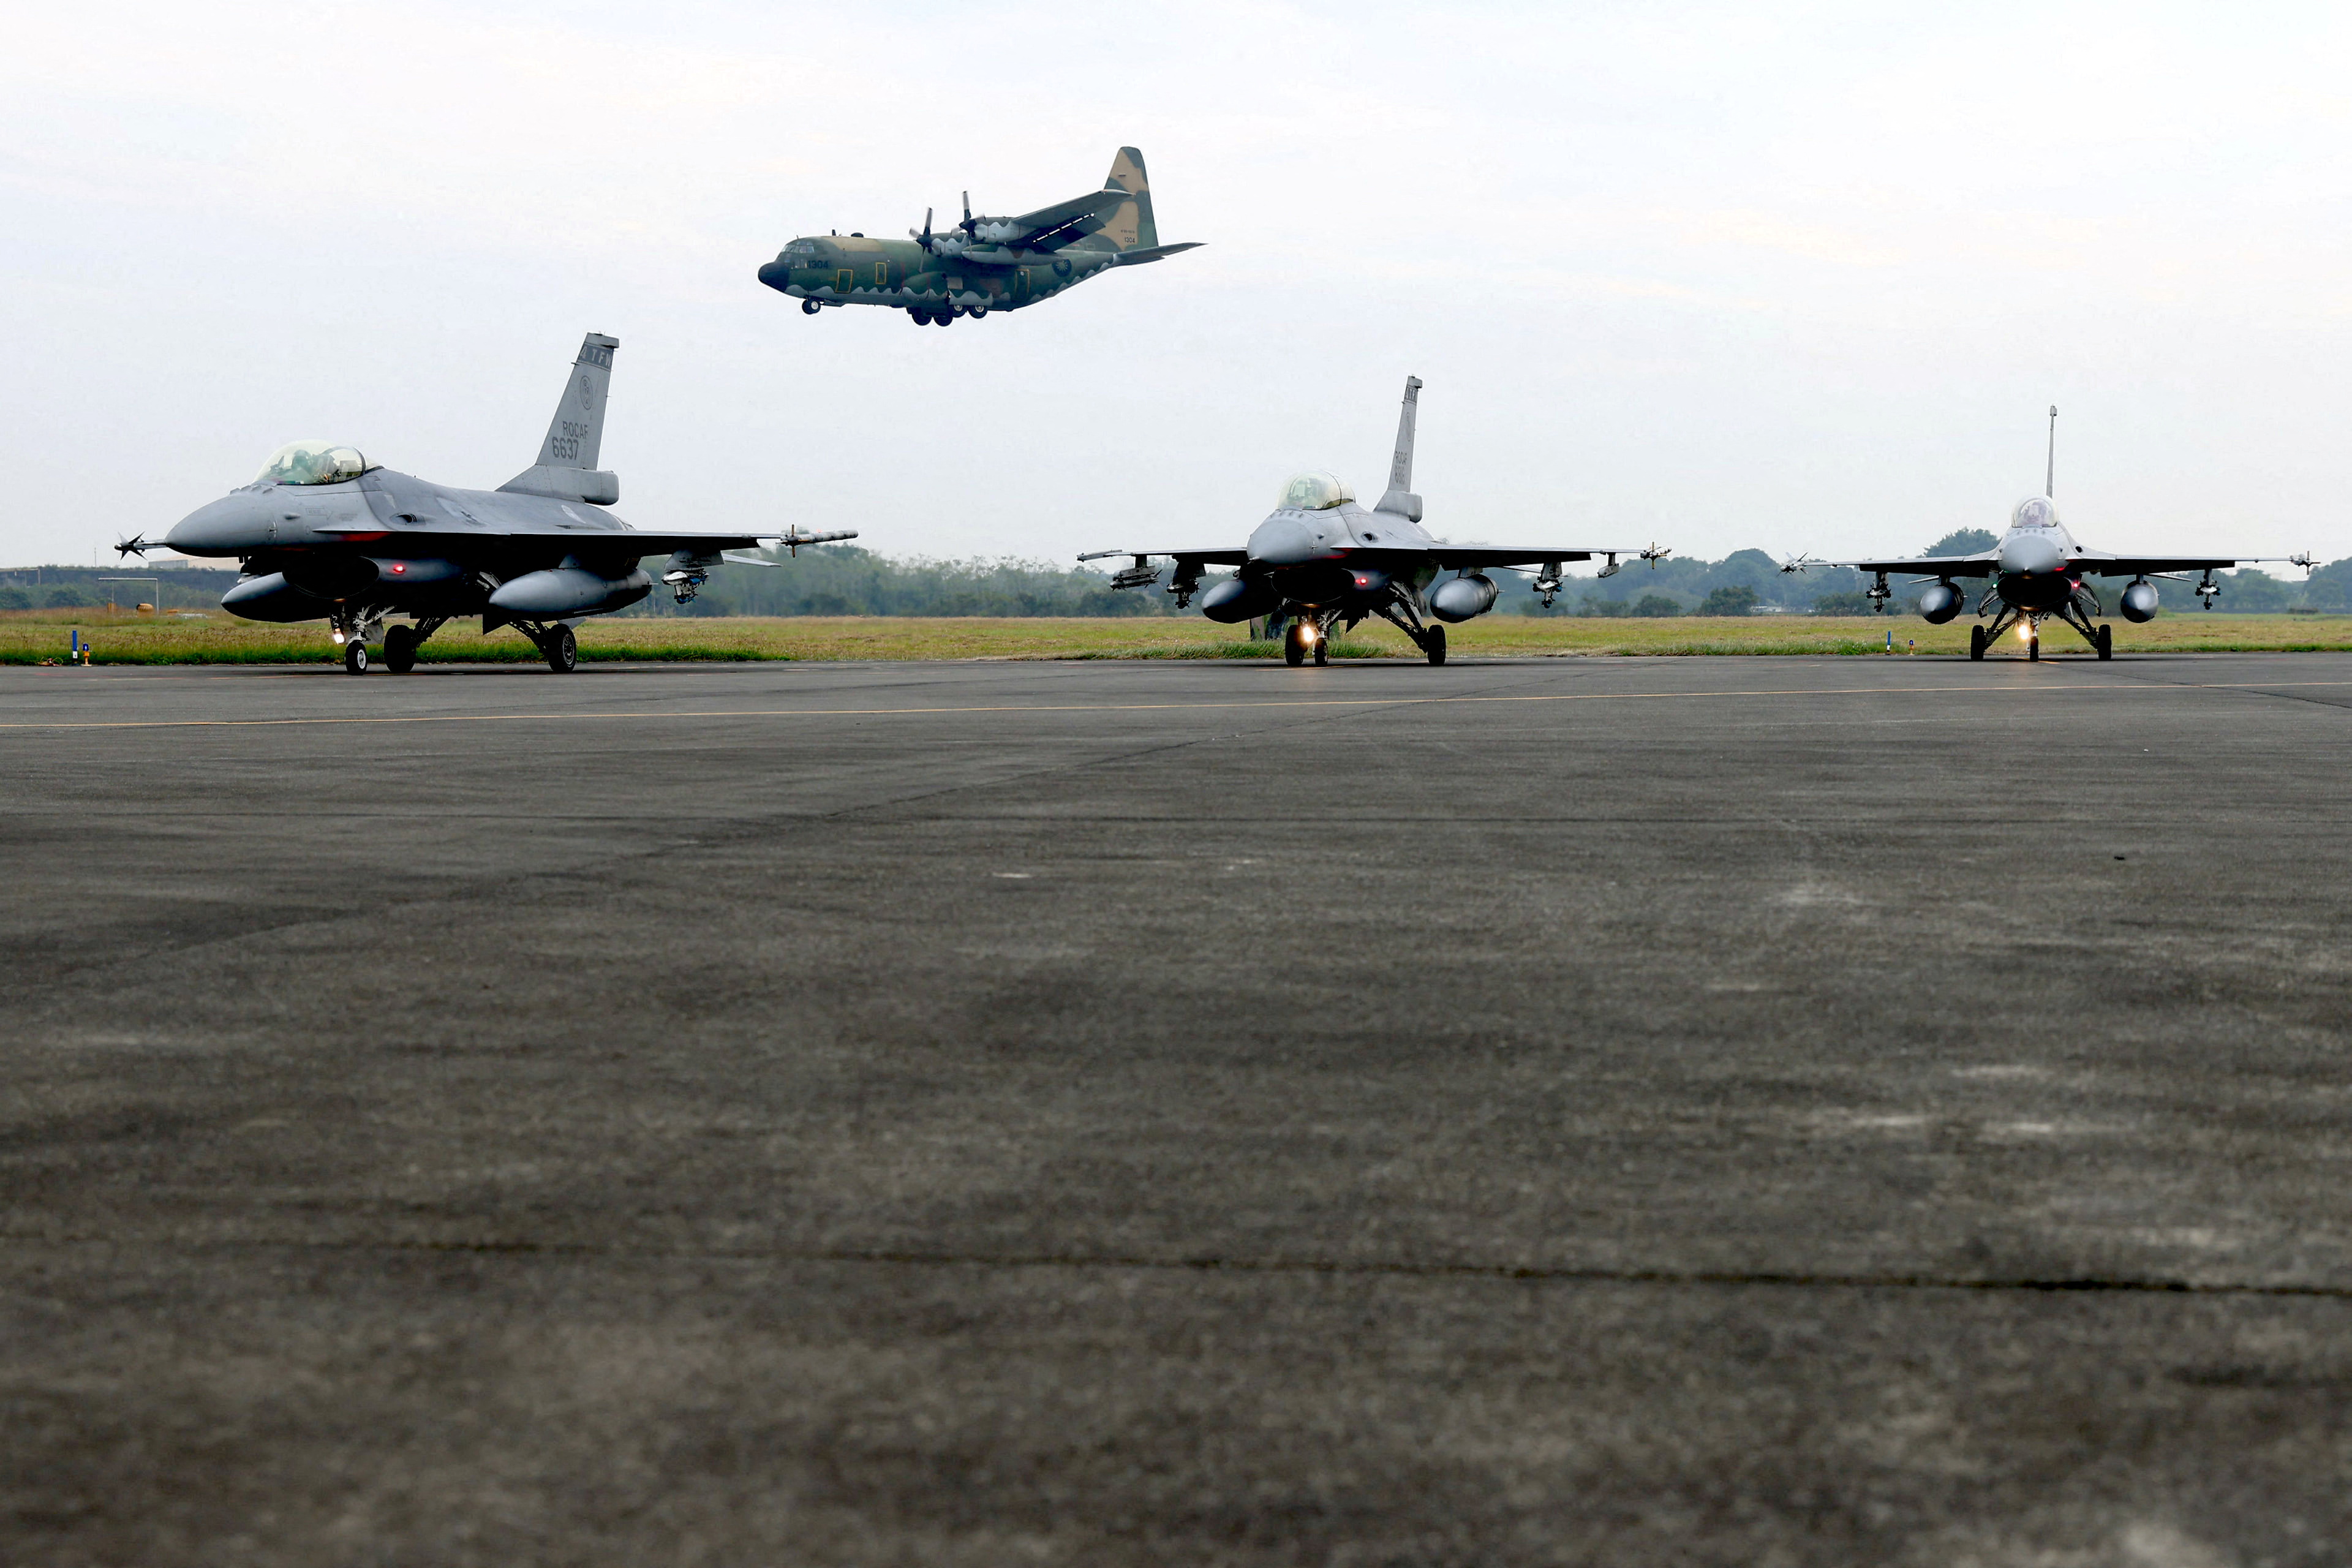 A Taiwan C-130 flies past two F-16V fighter jets during an annual New Year's drill in Chiayi